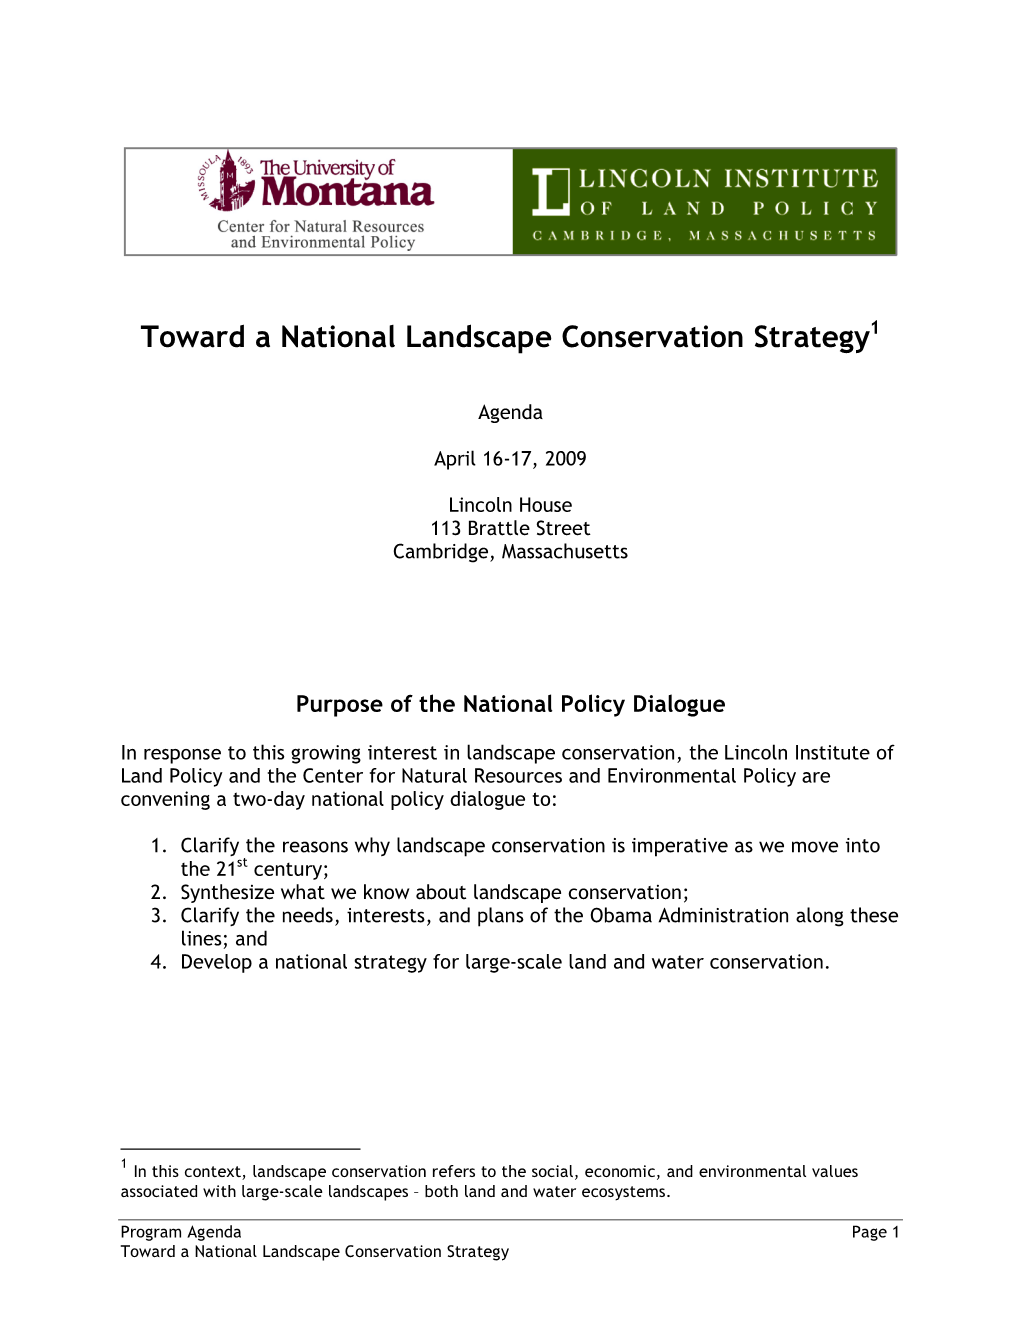 National Policy Dialogue on Landscape Conservation